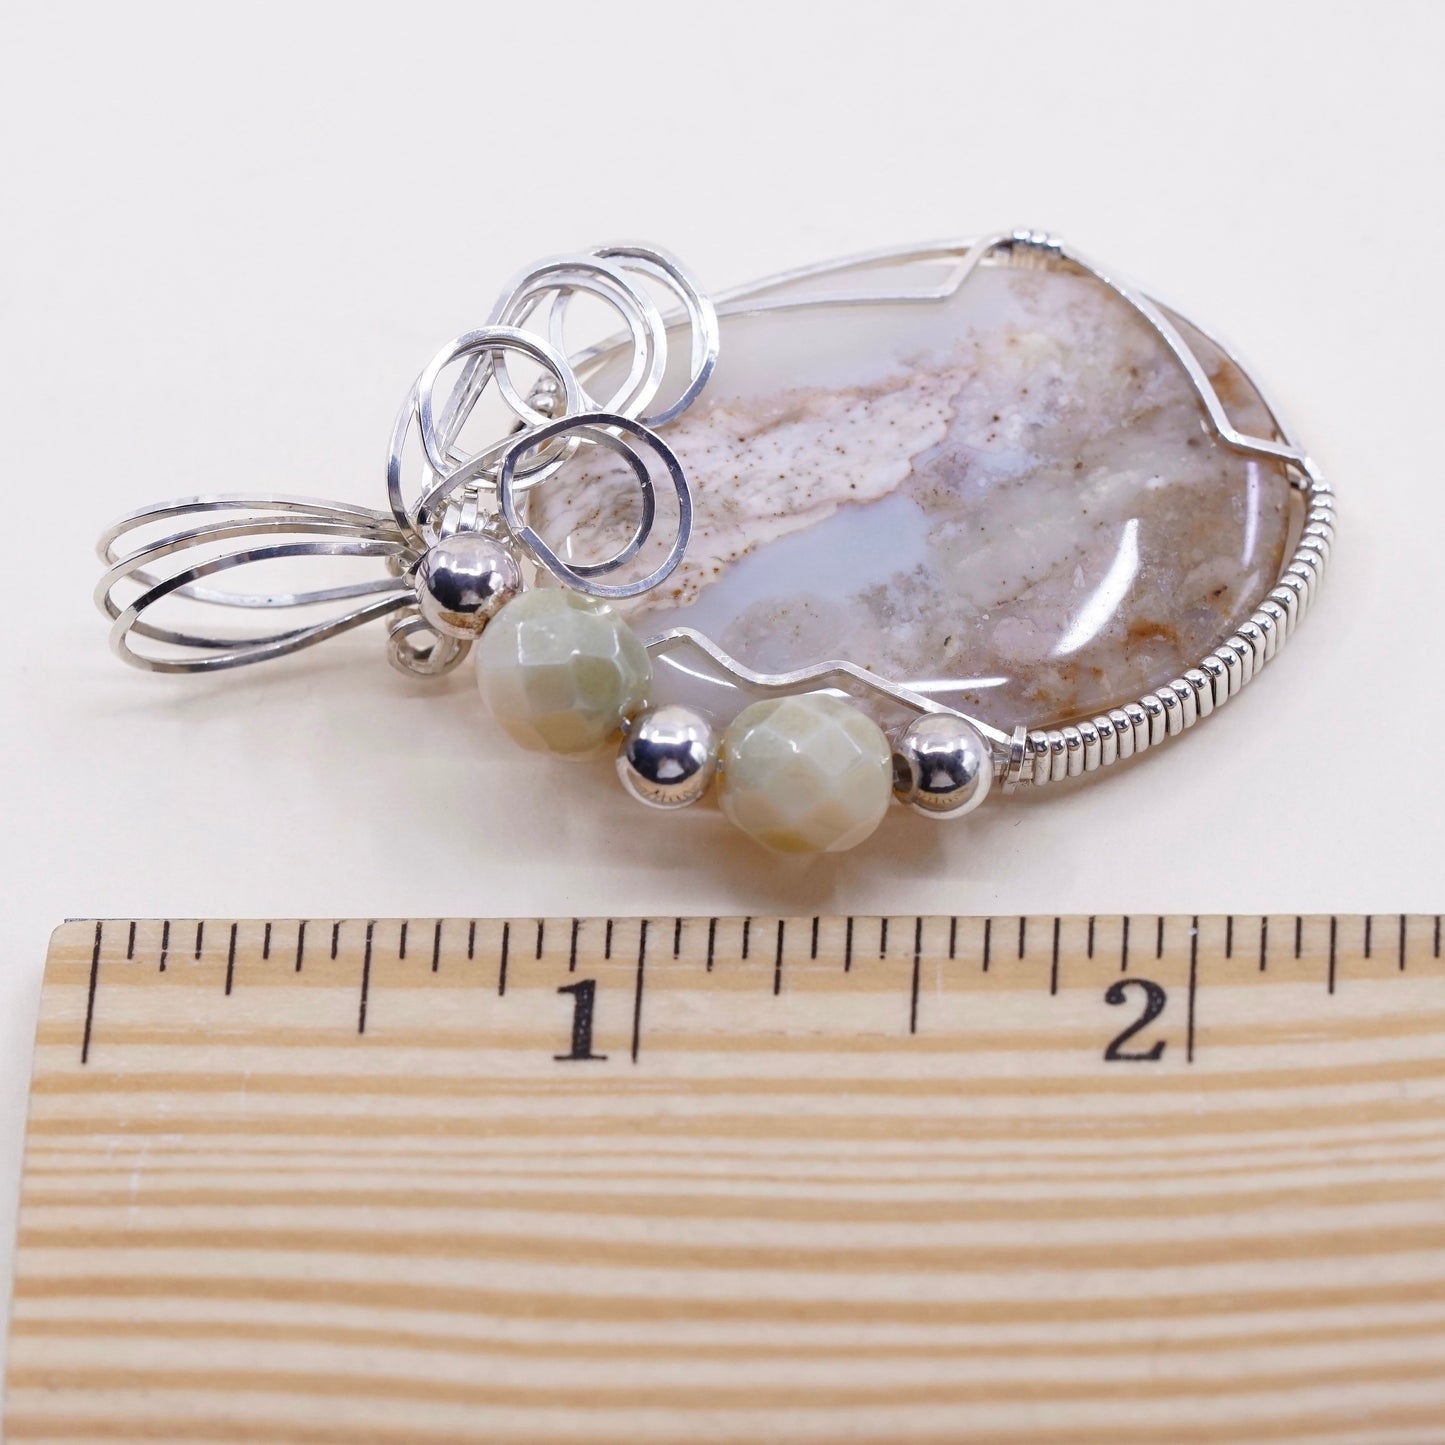 vtg southwestern sterling silver handmade pendant, 925 with crazy lace agate